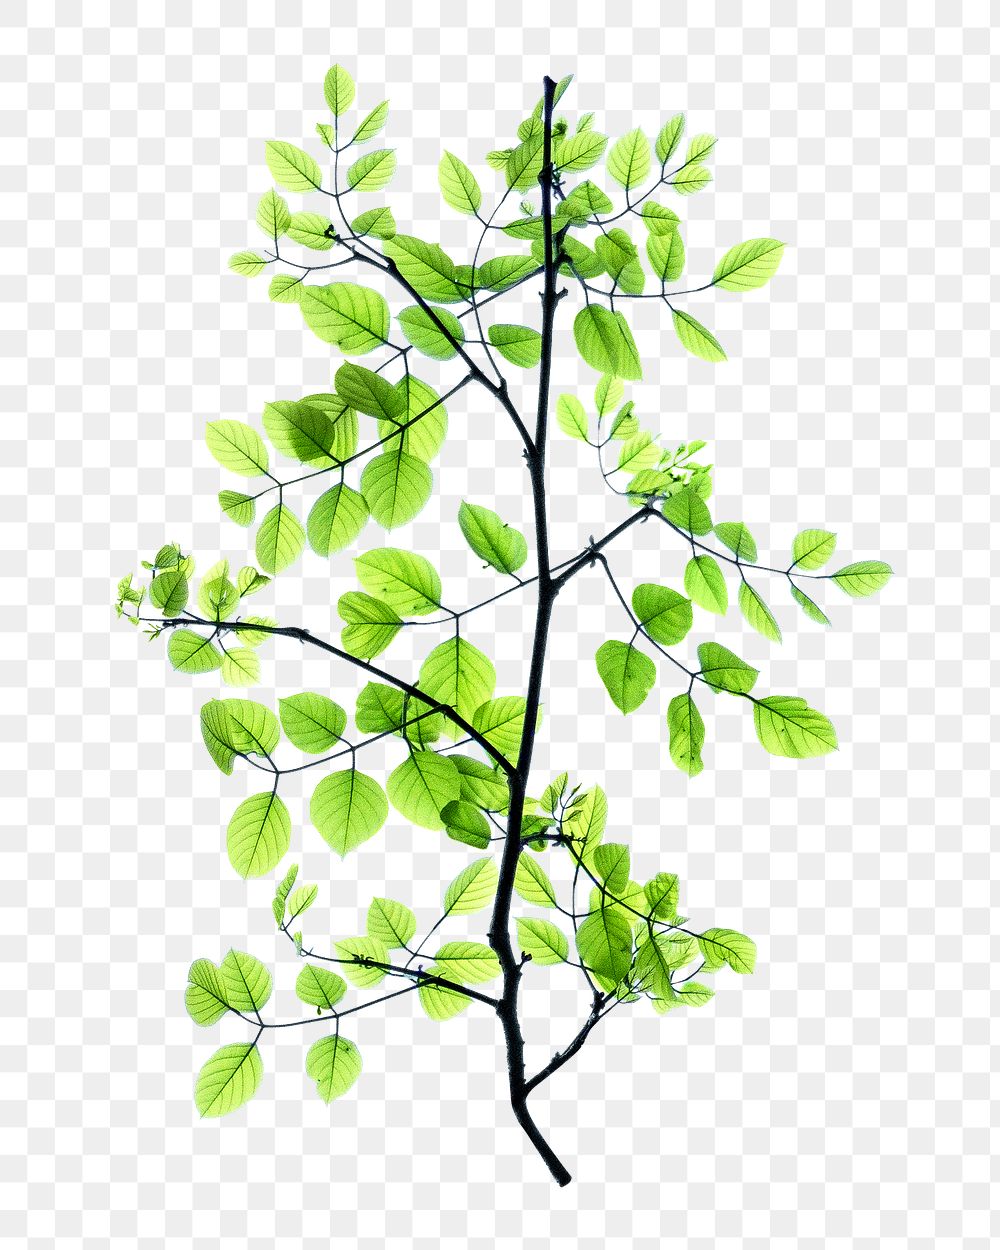 Green tree branch png, transparent background